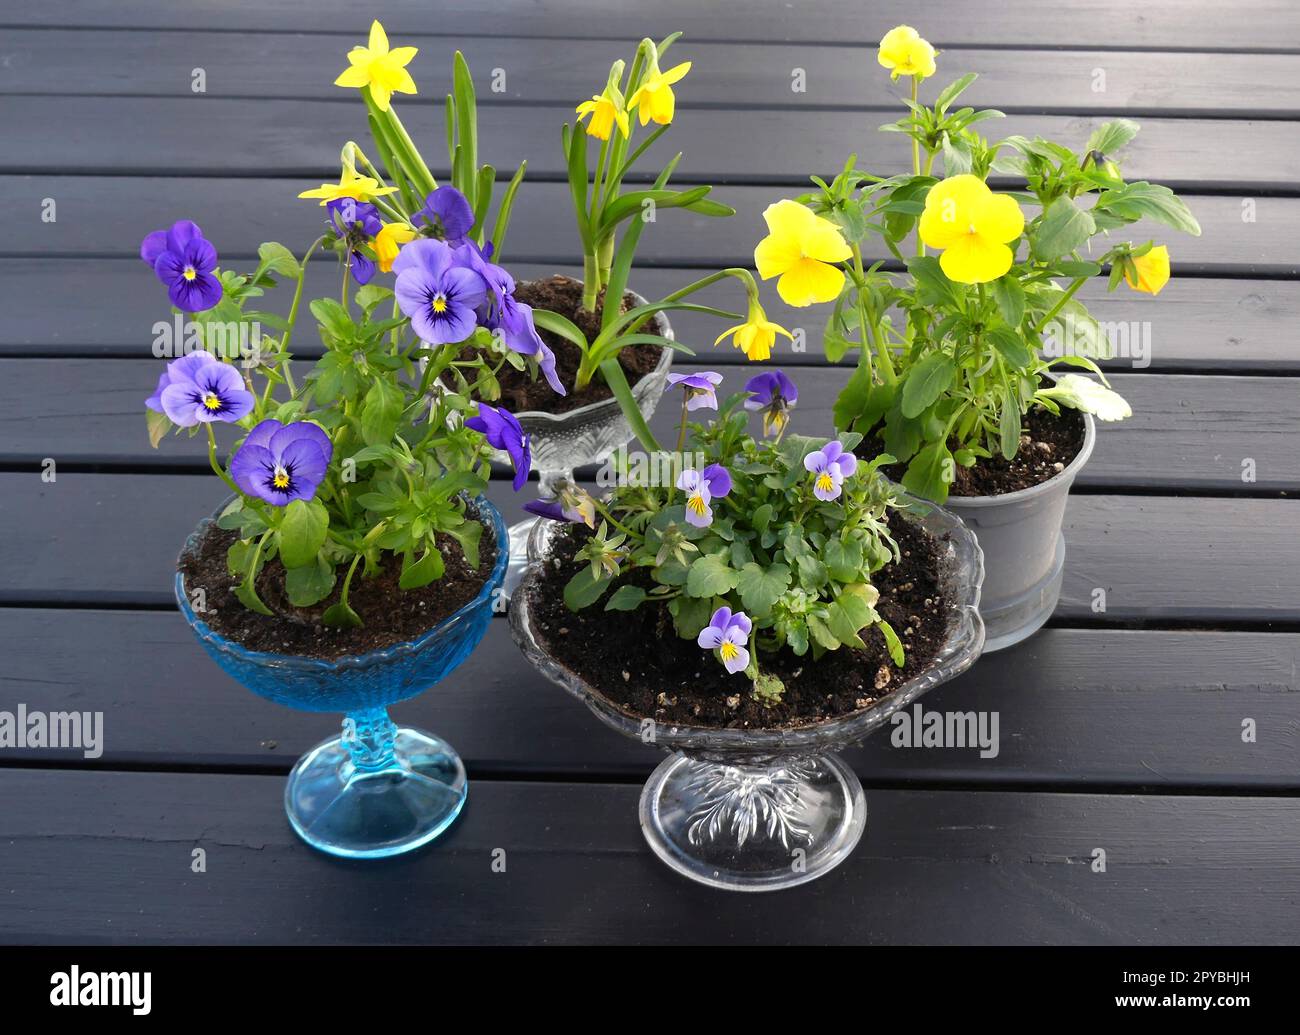 Narcissus and pansies in bowls Stock Photo